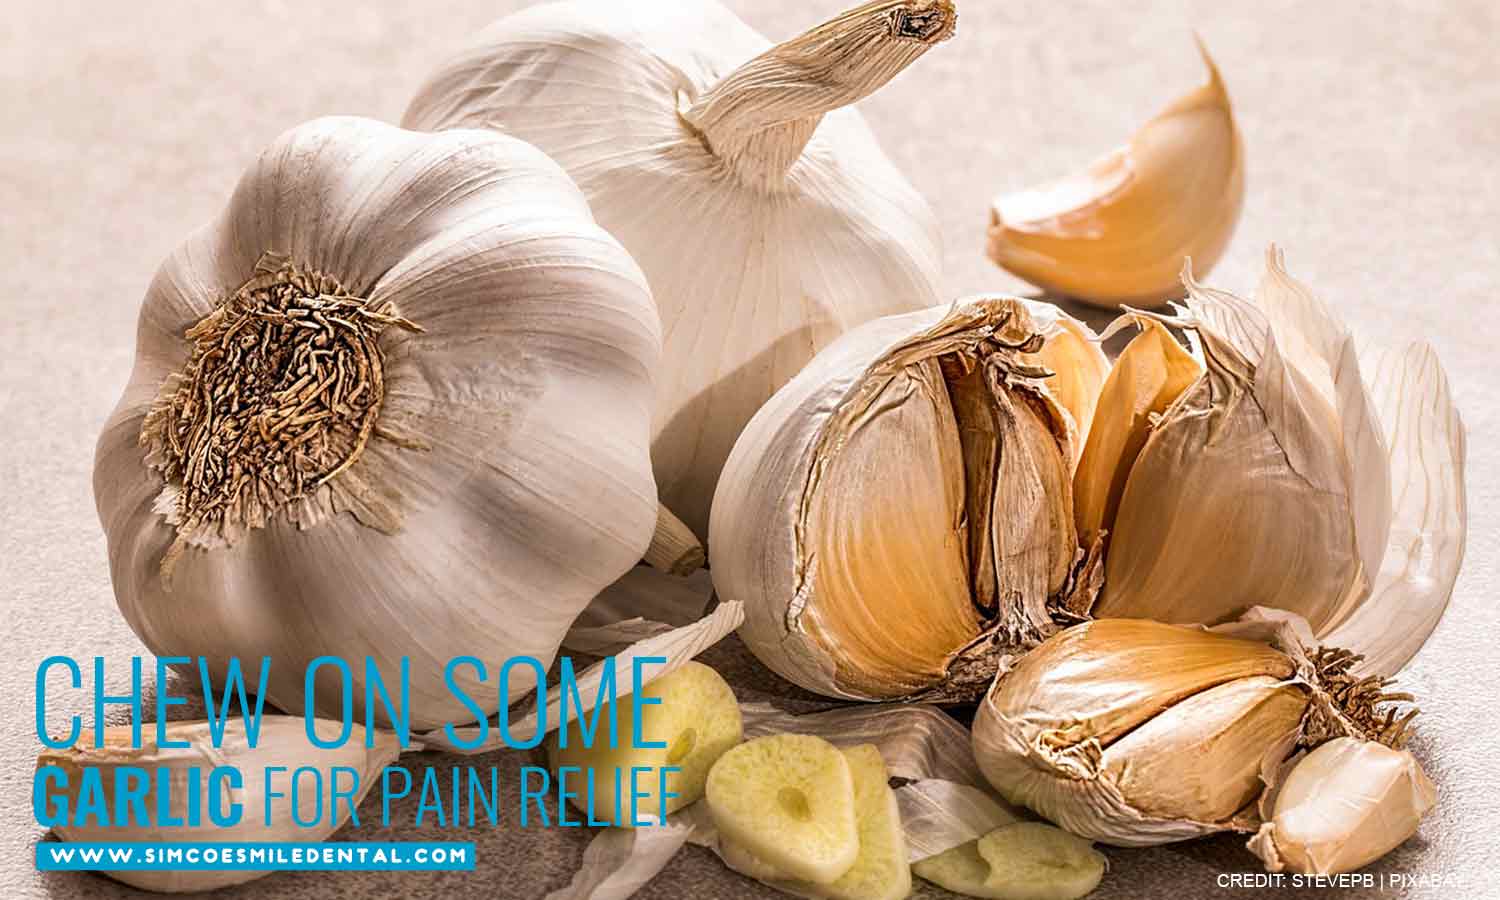 Chew on some garlic for pain relief